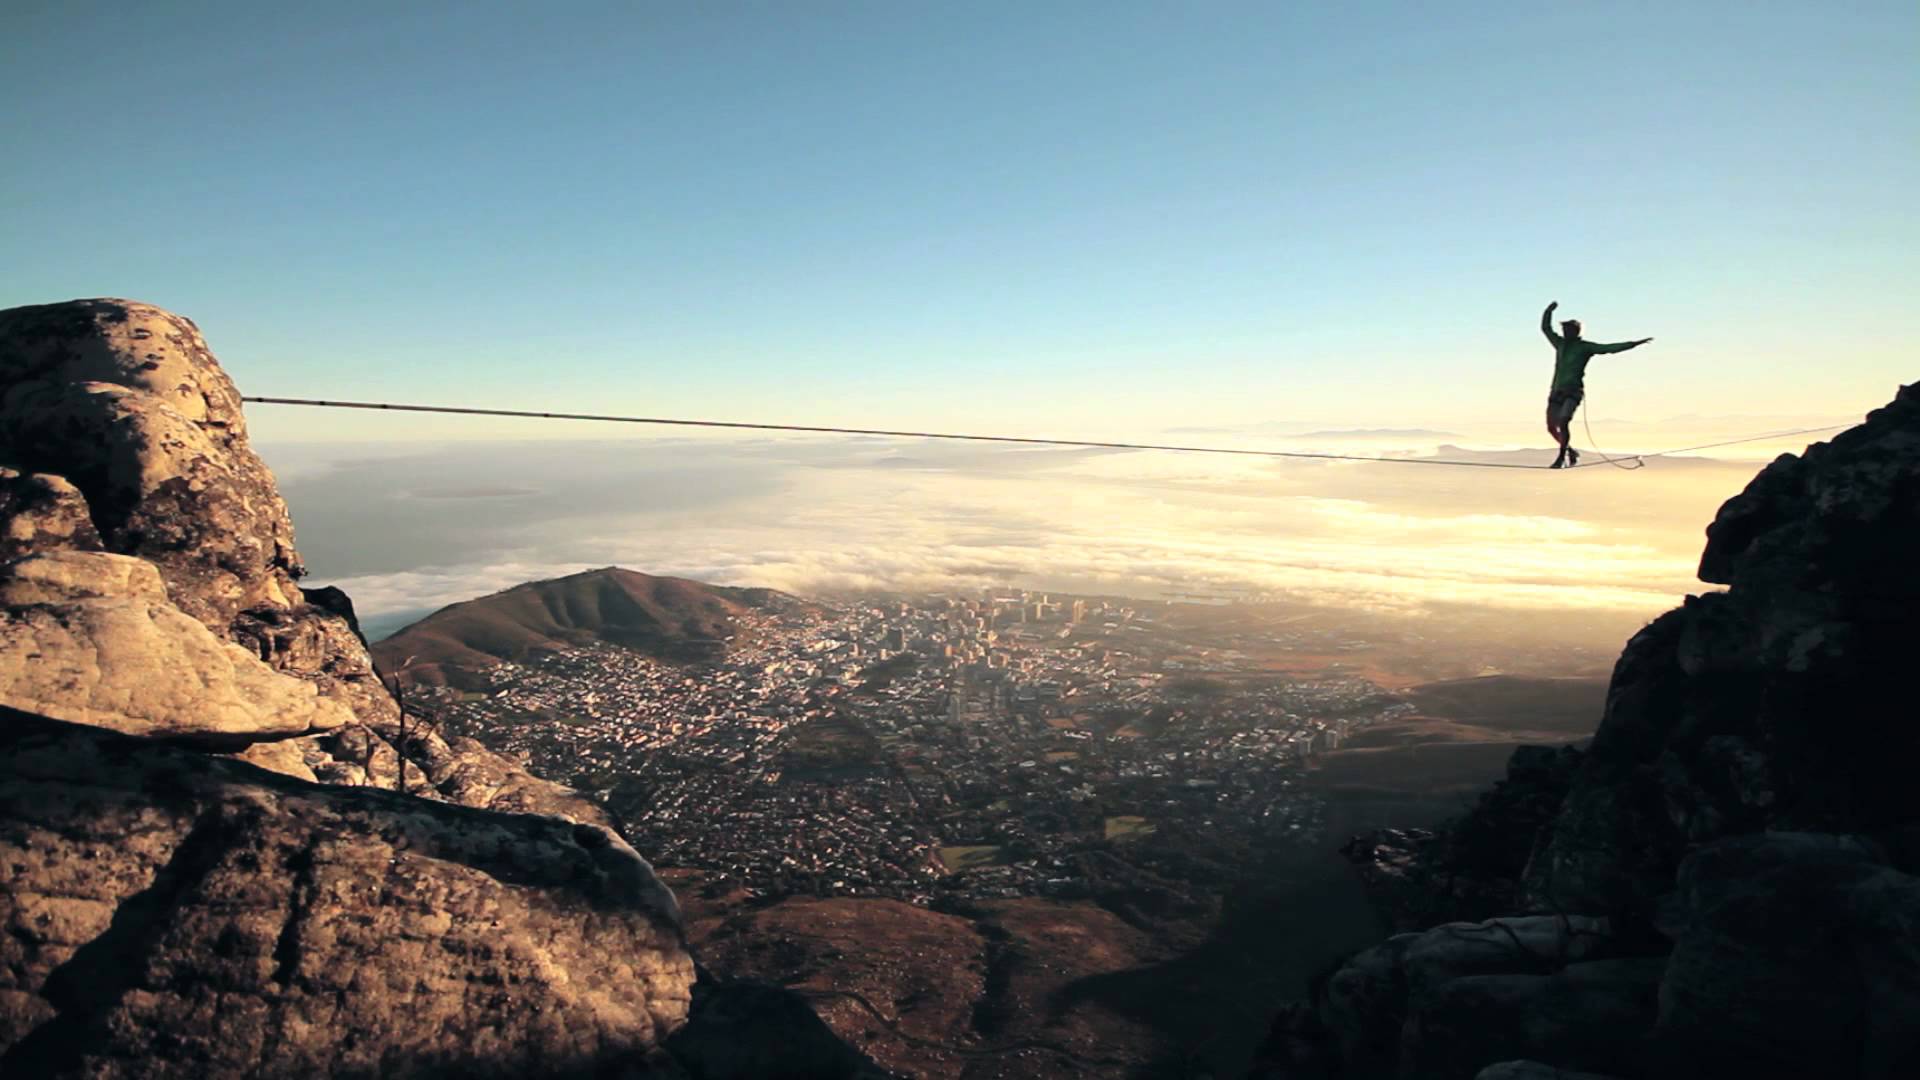 Cape Town Part4 - Sunrise on Table Mountain - YouTube